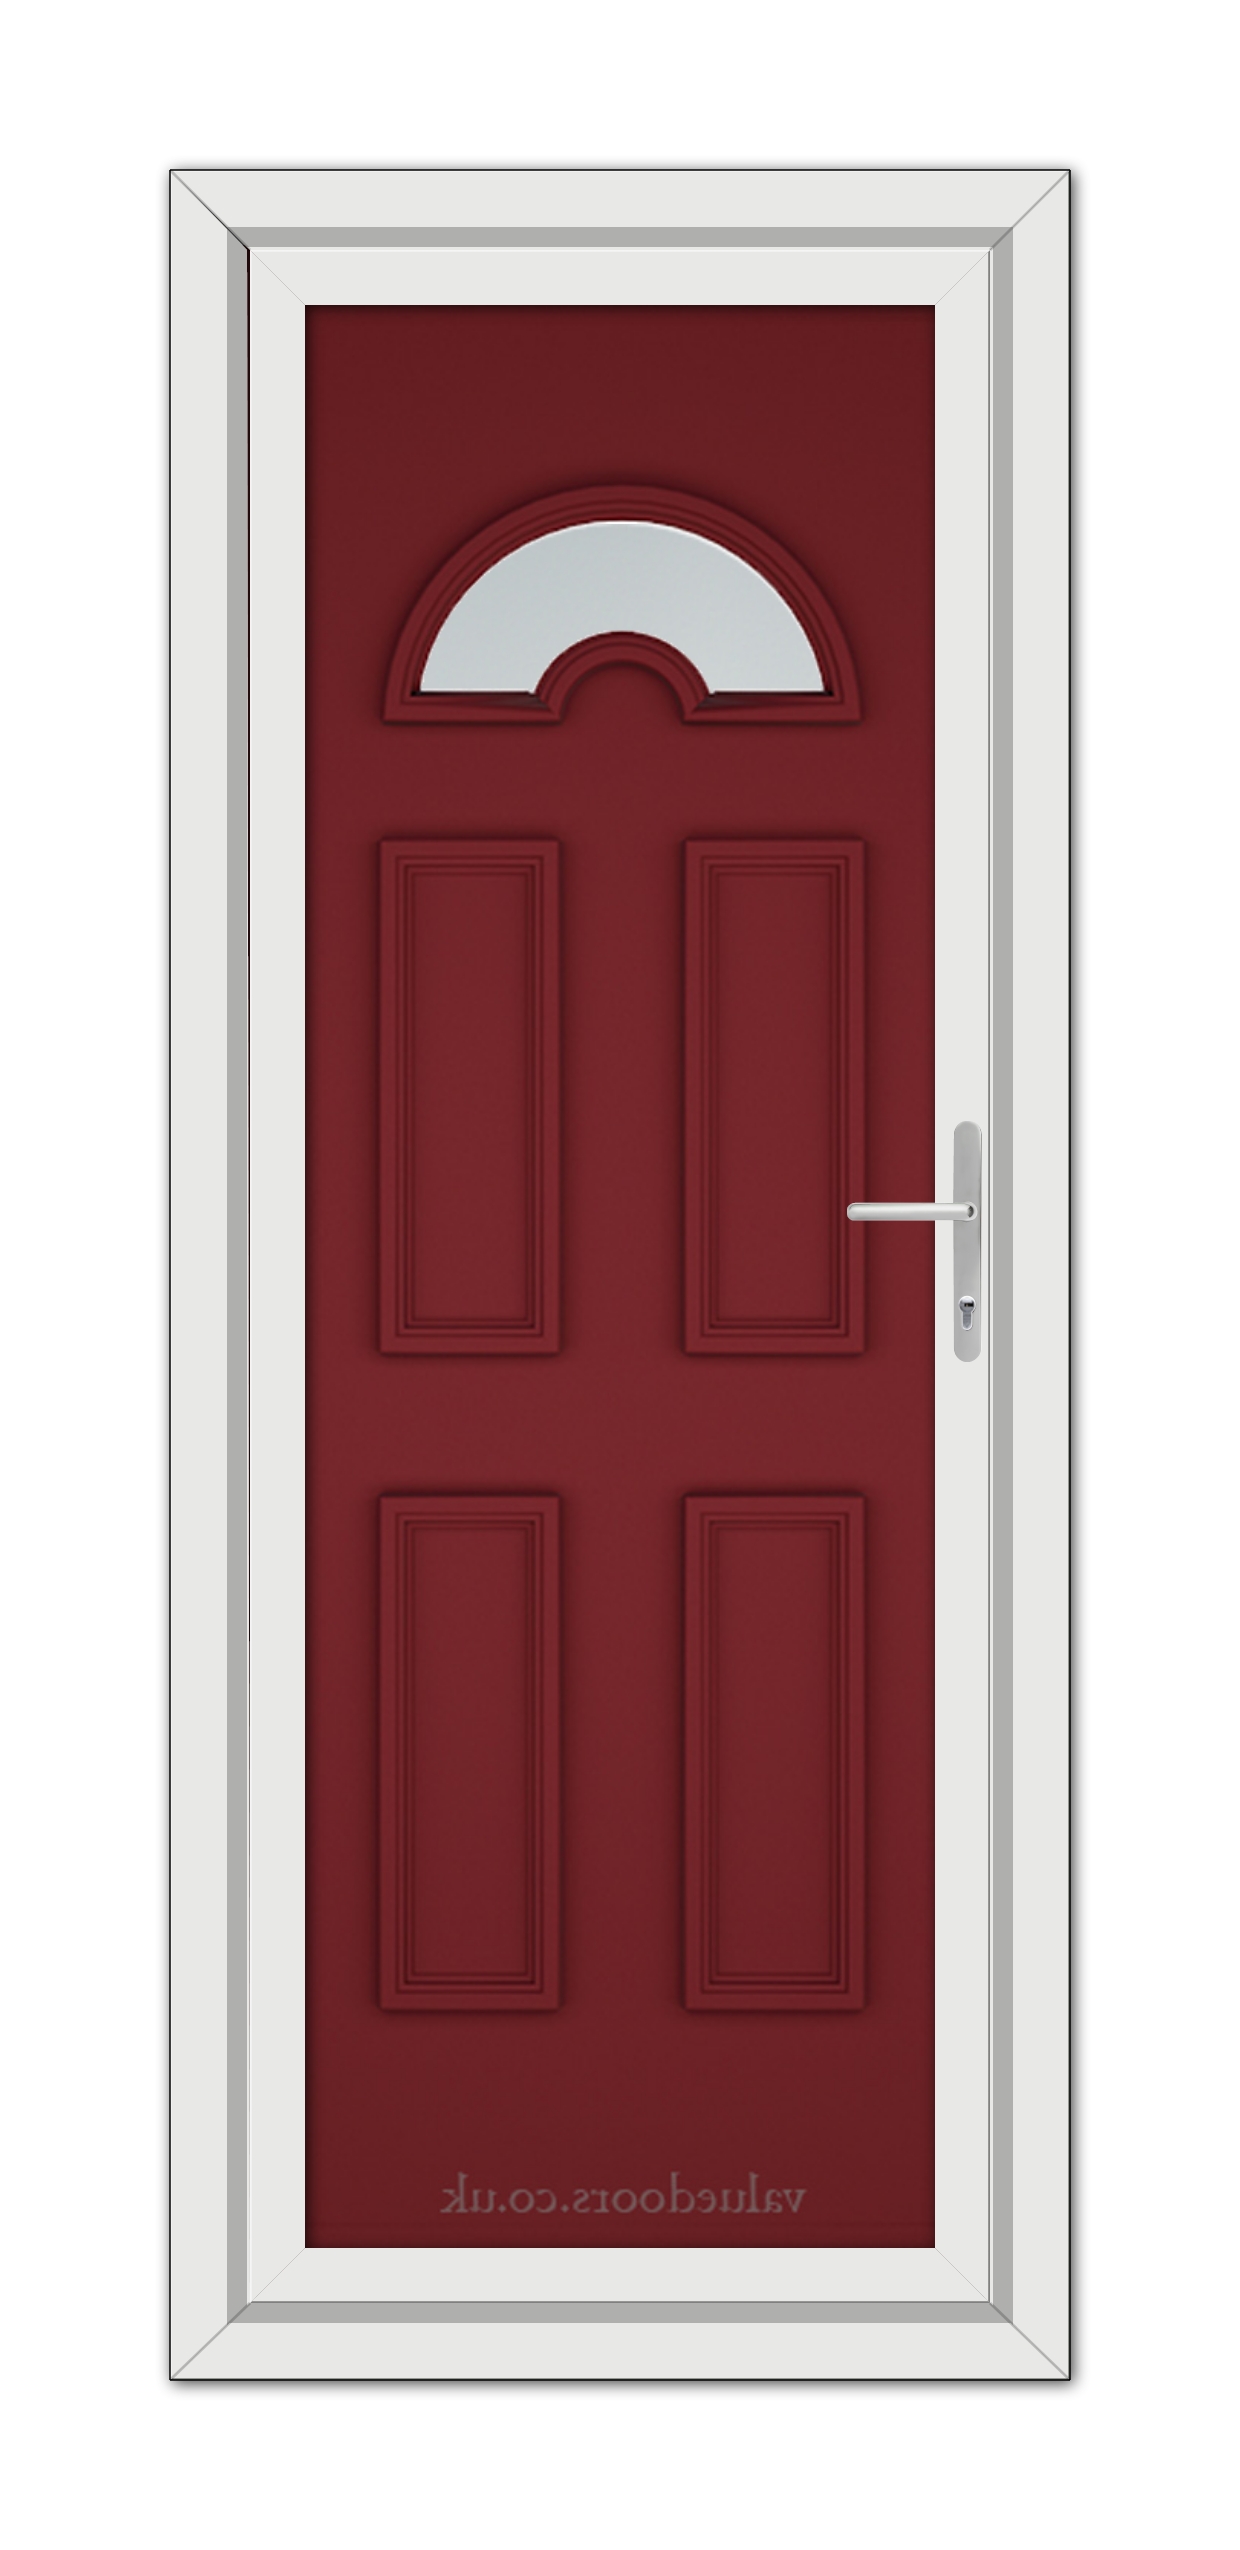 Red Sandringham uPVC door with a white frame, featuring a semi-circular transom window and a modern handle.